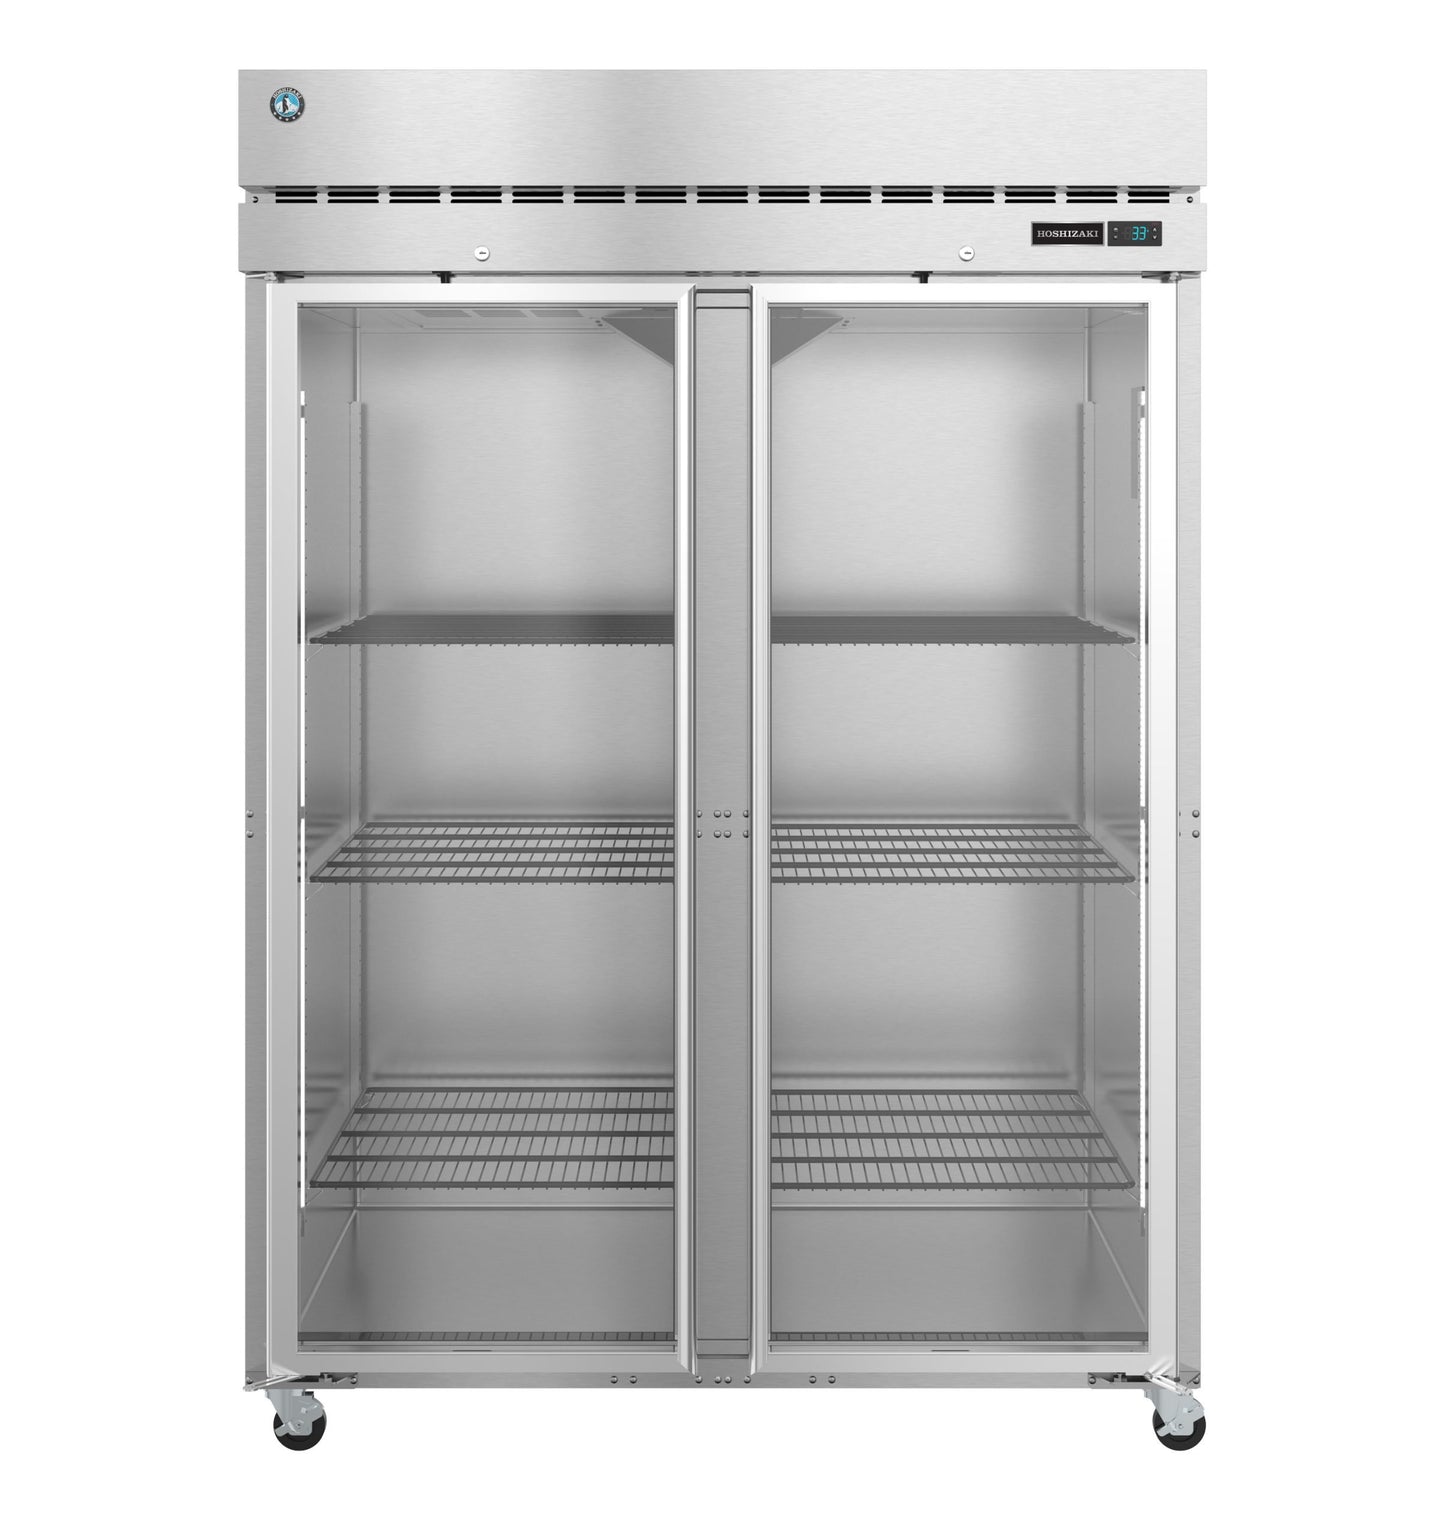 R2A-FG, Refrigerator, Two Section Upright, Full Glass Doors with Lock